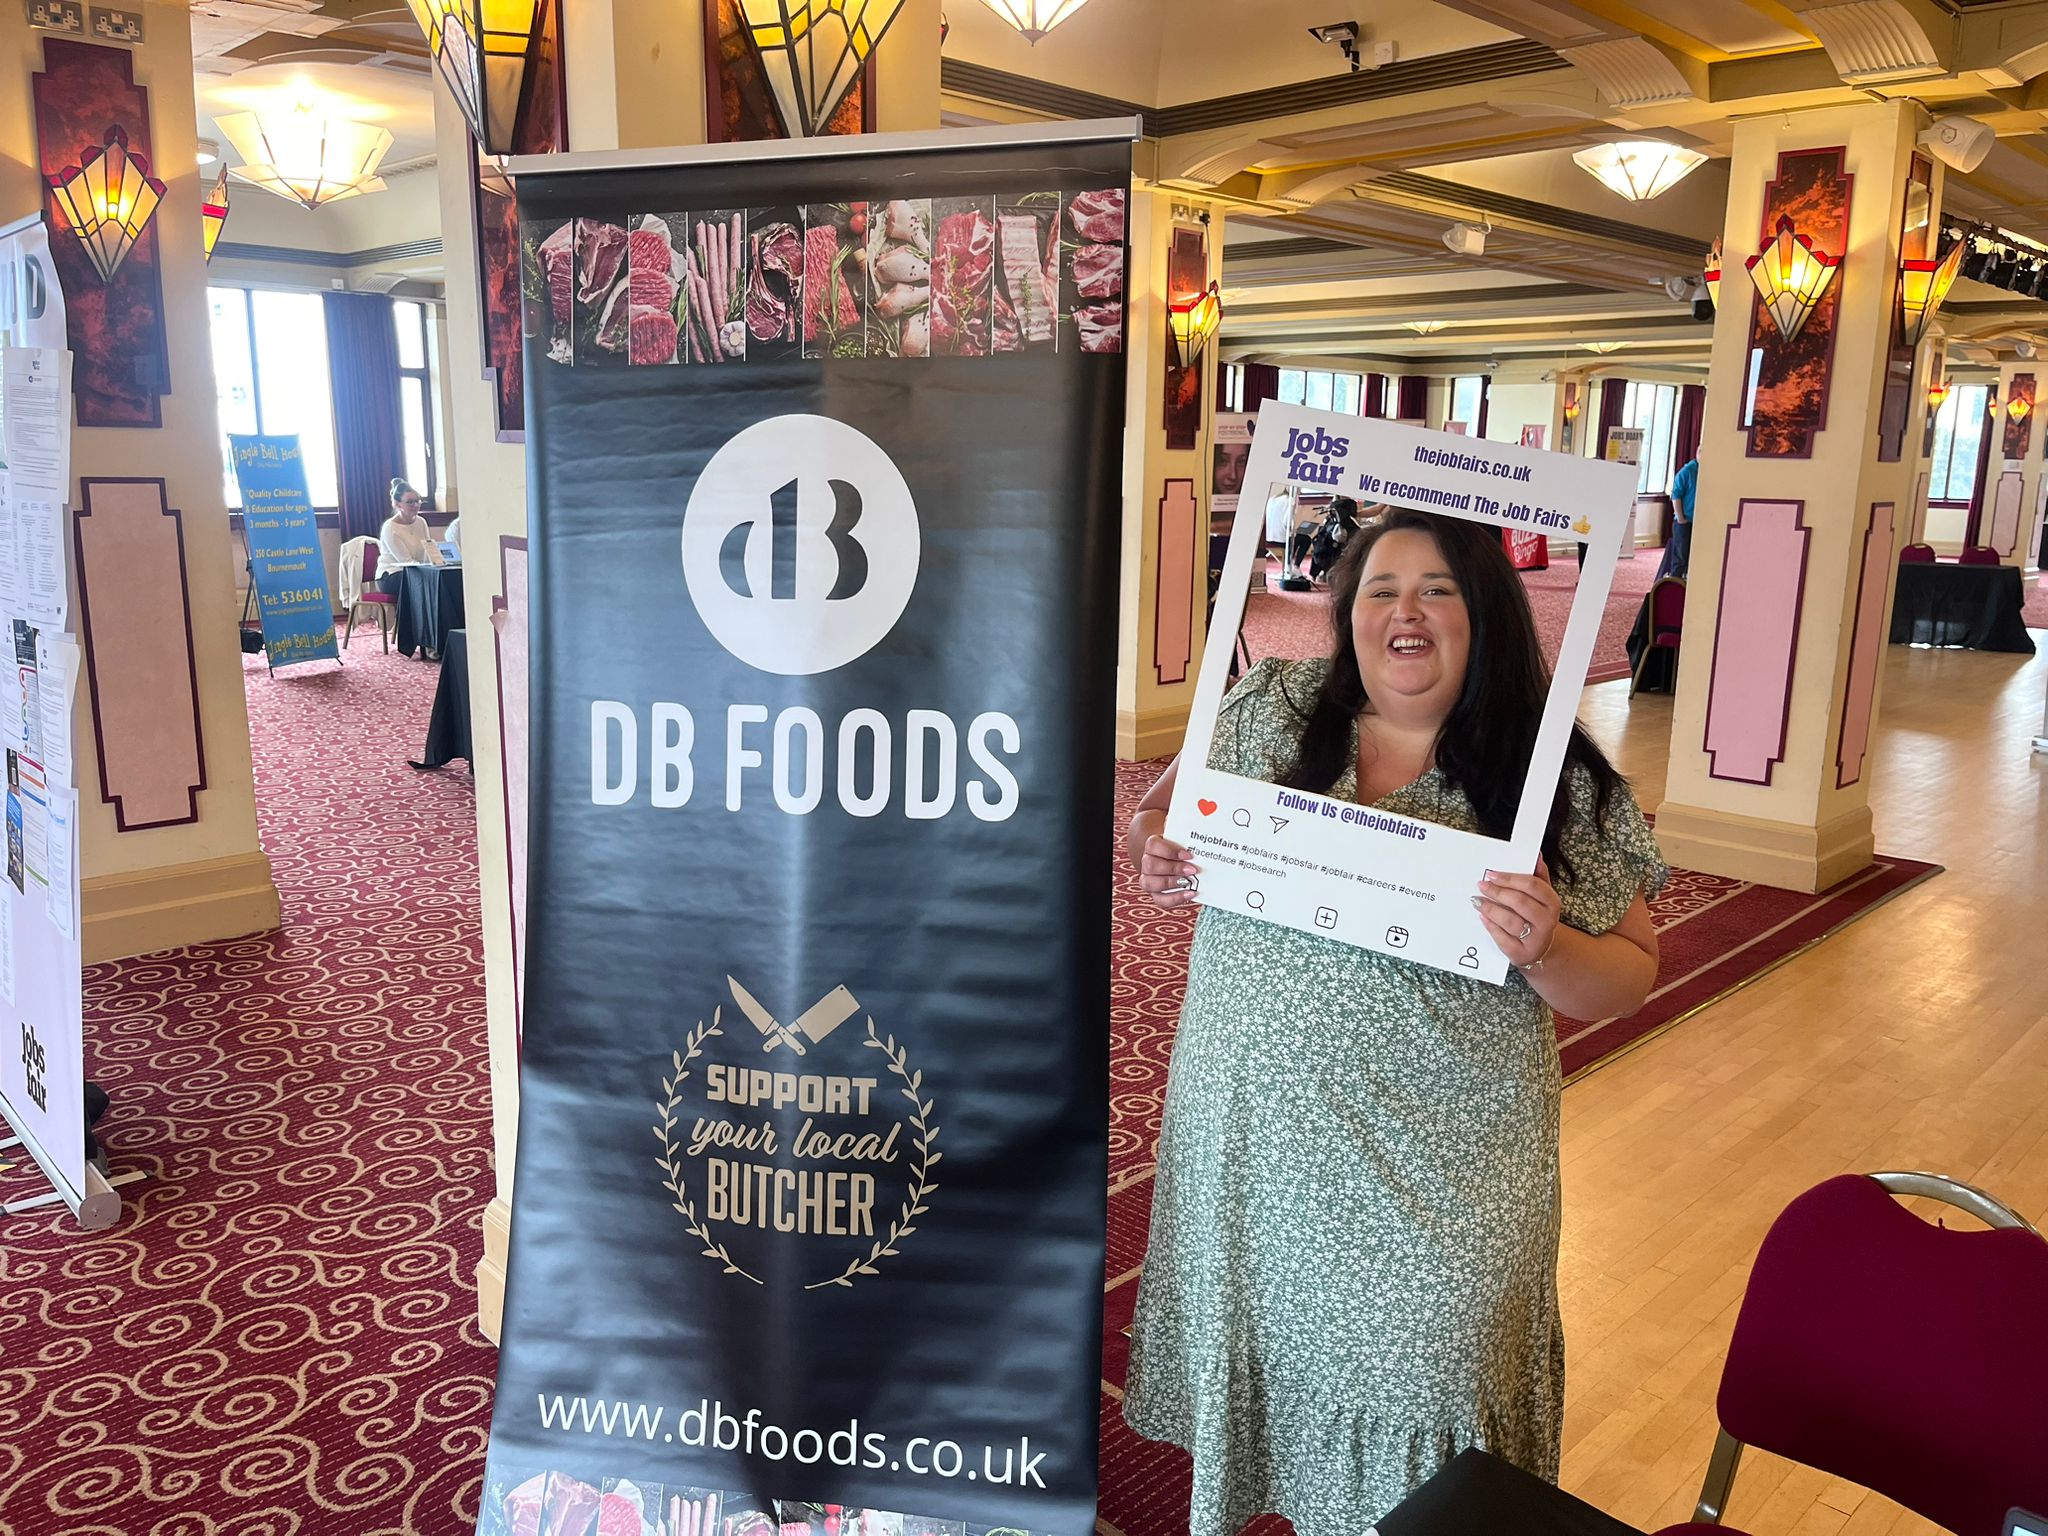 DB Foods at our event in Bournemouth